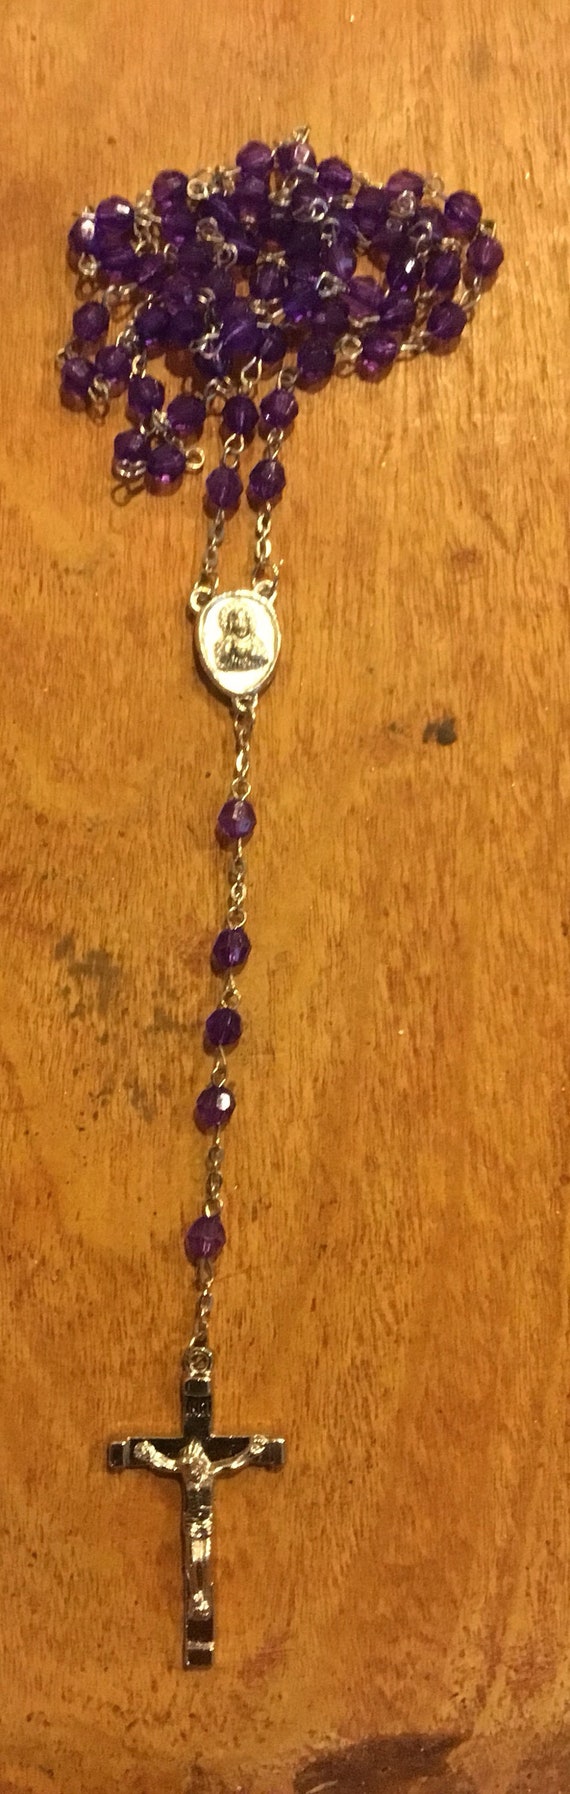 Vintage Purple Beaded and Silver Toned Rosary